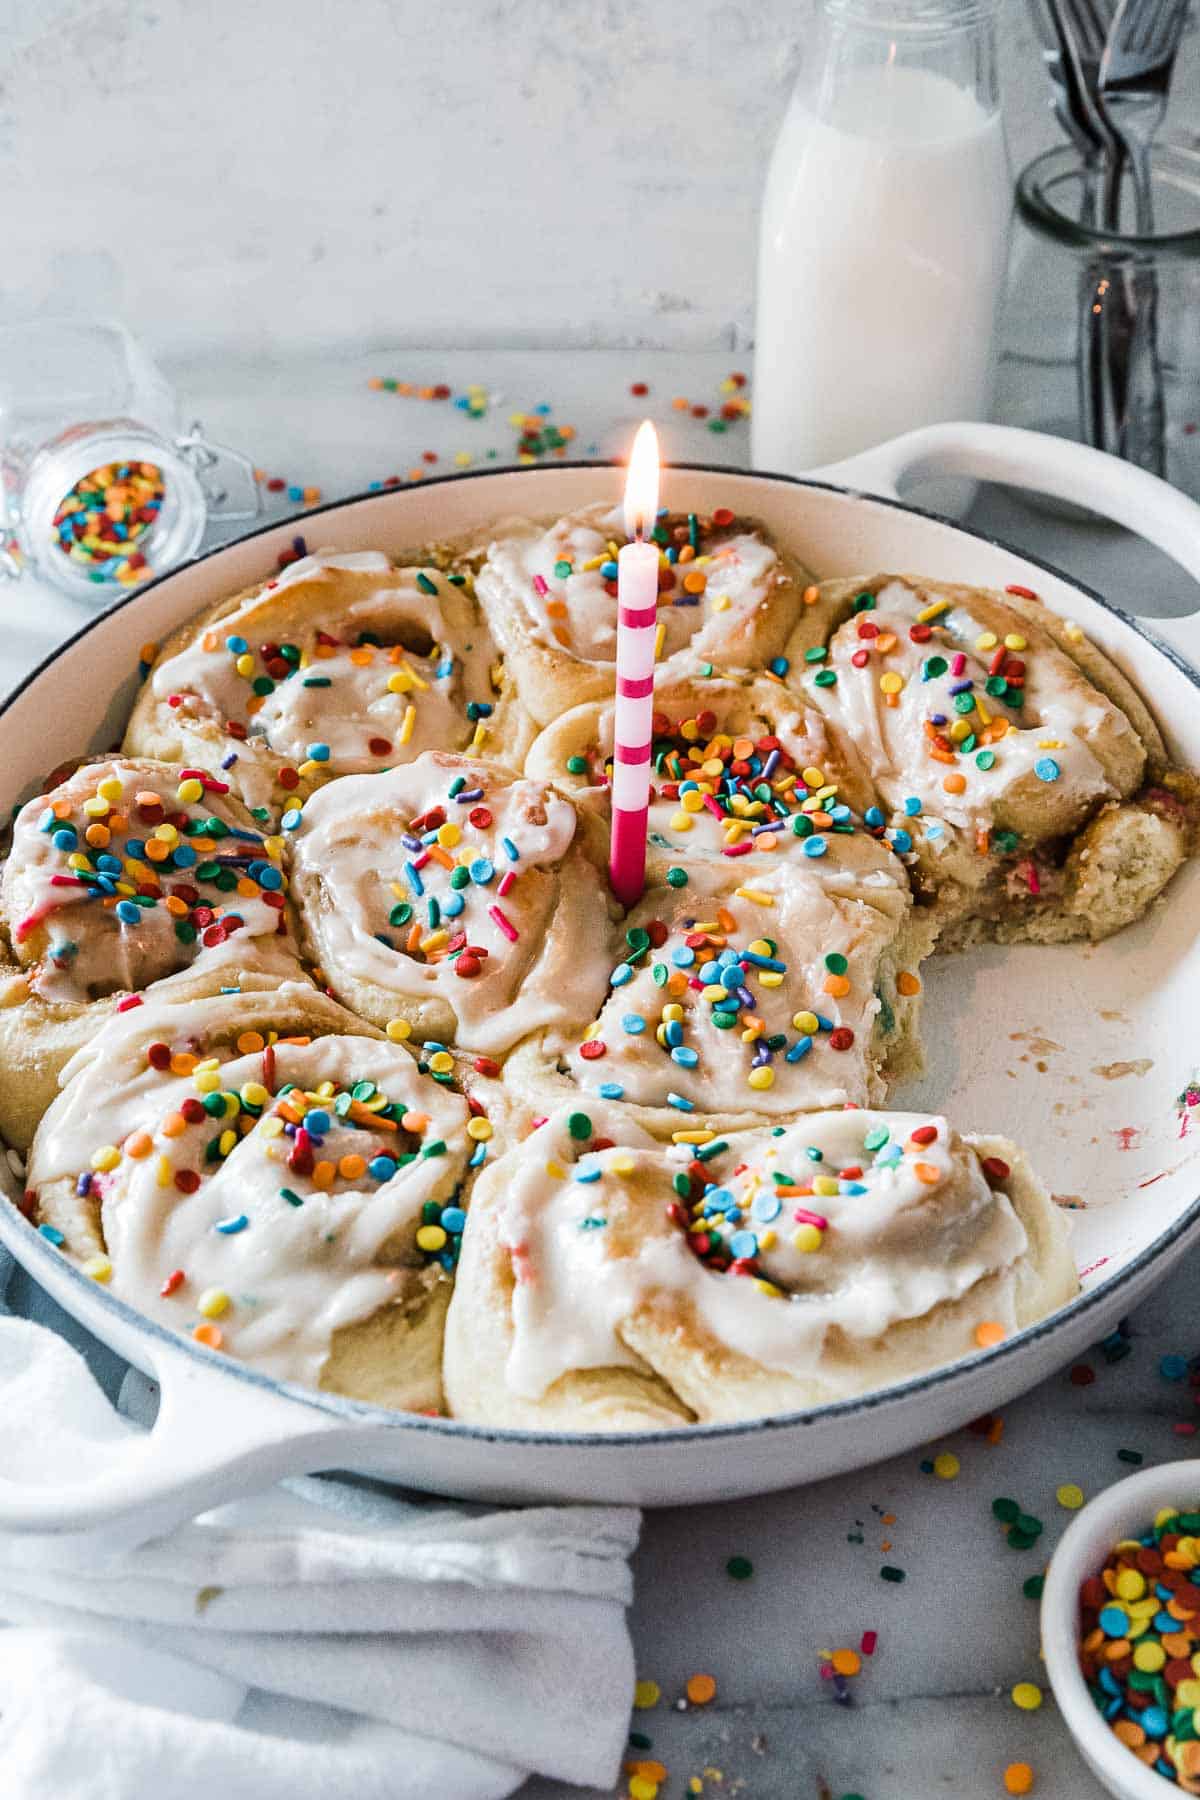 Birthday cake cinnamon rolls in a white braiser. There is a lit candle in the middle and the rolls are garnished with sprinkles.